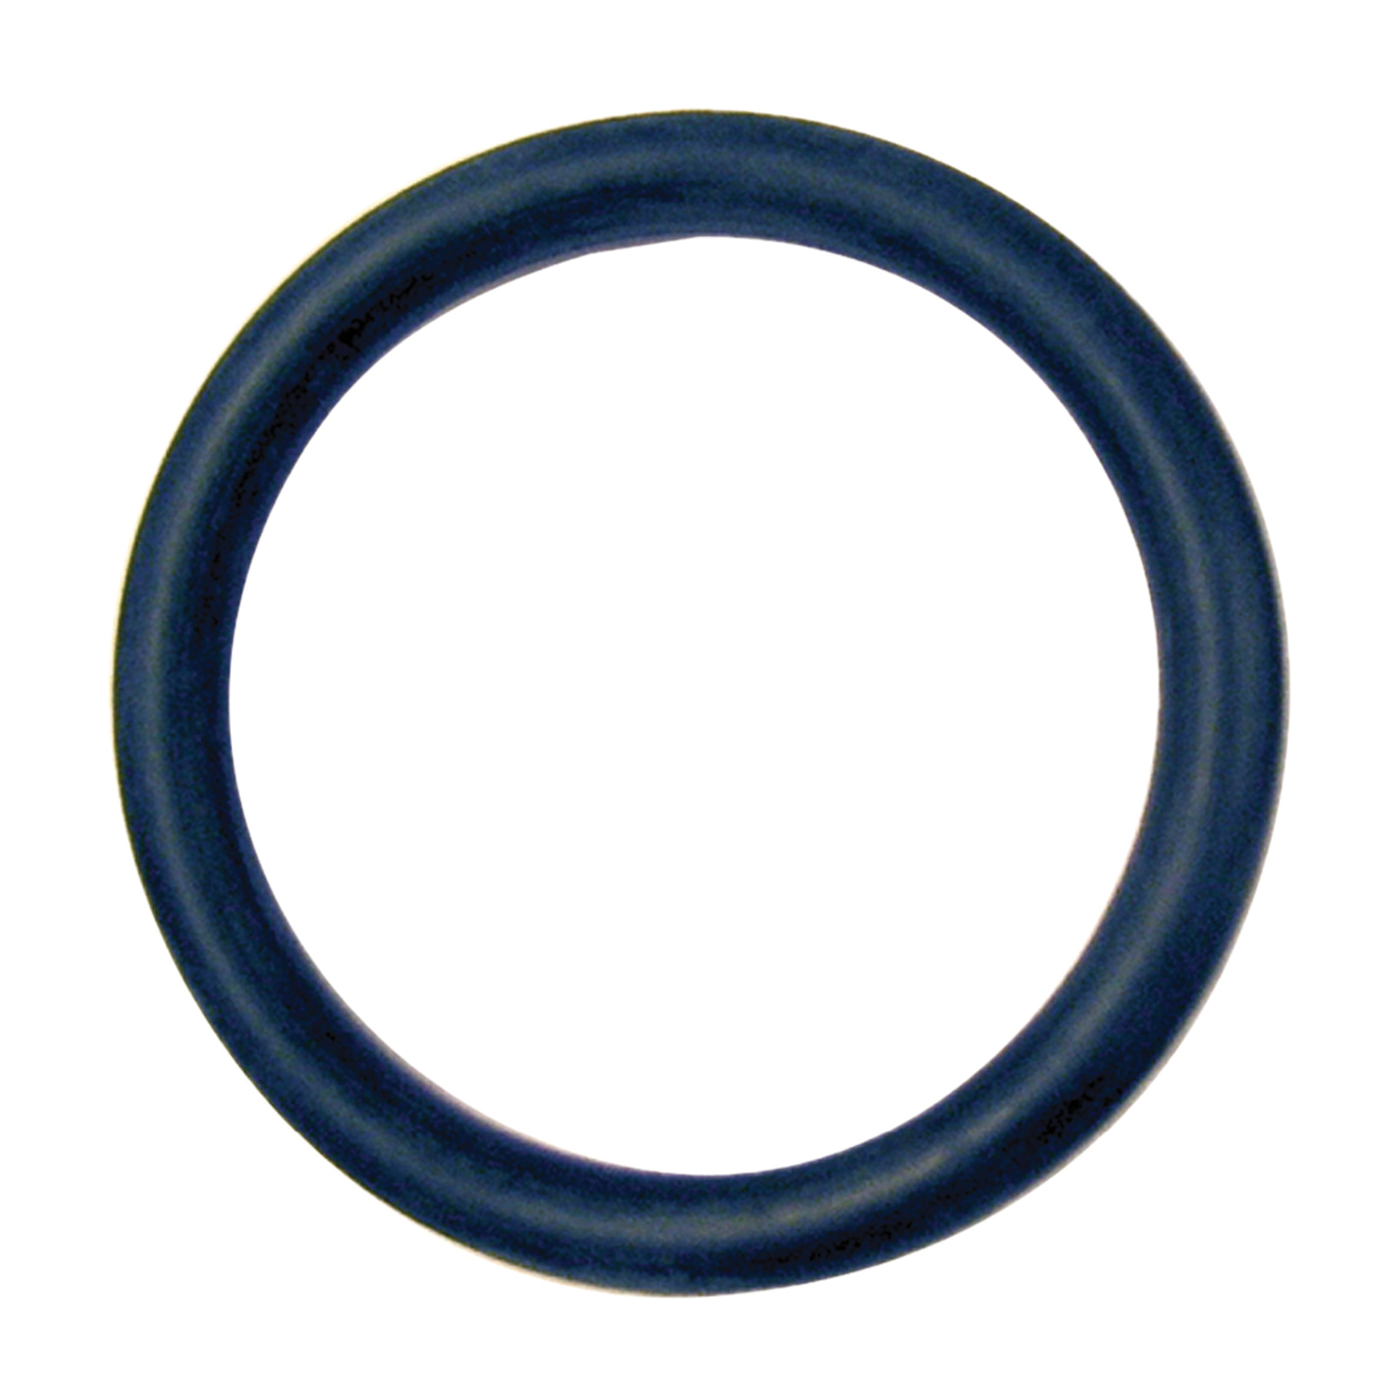 780024 Faucet O-Ring, 7/16 in ID x 11/16 in OD Dia, 1/8 in Thick